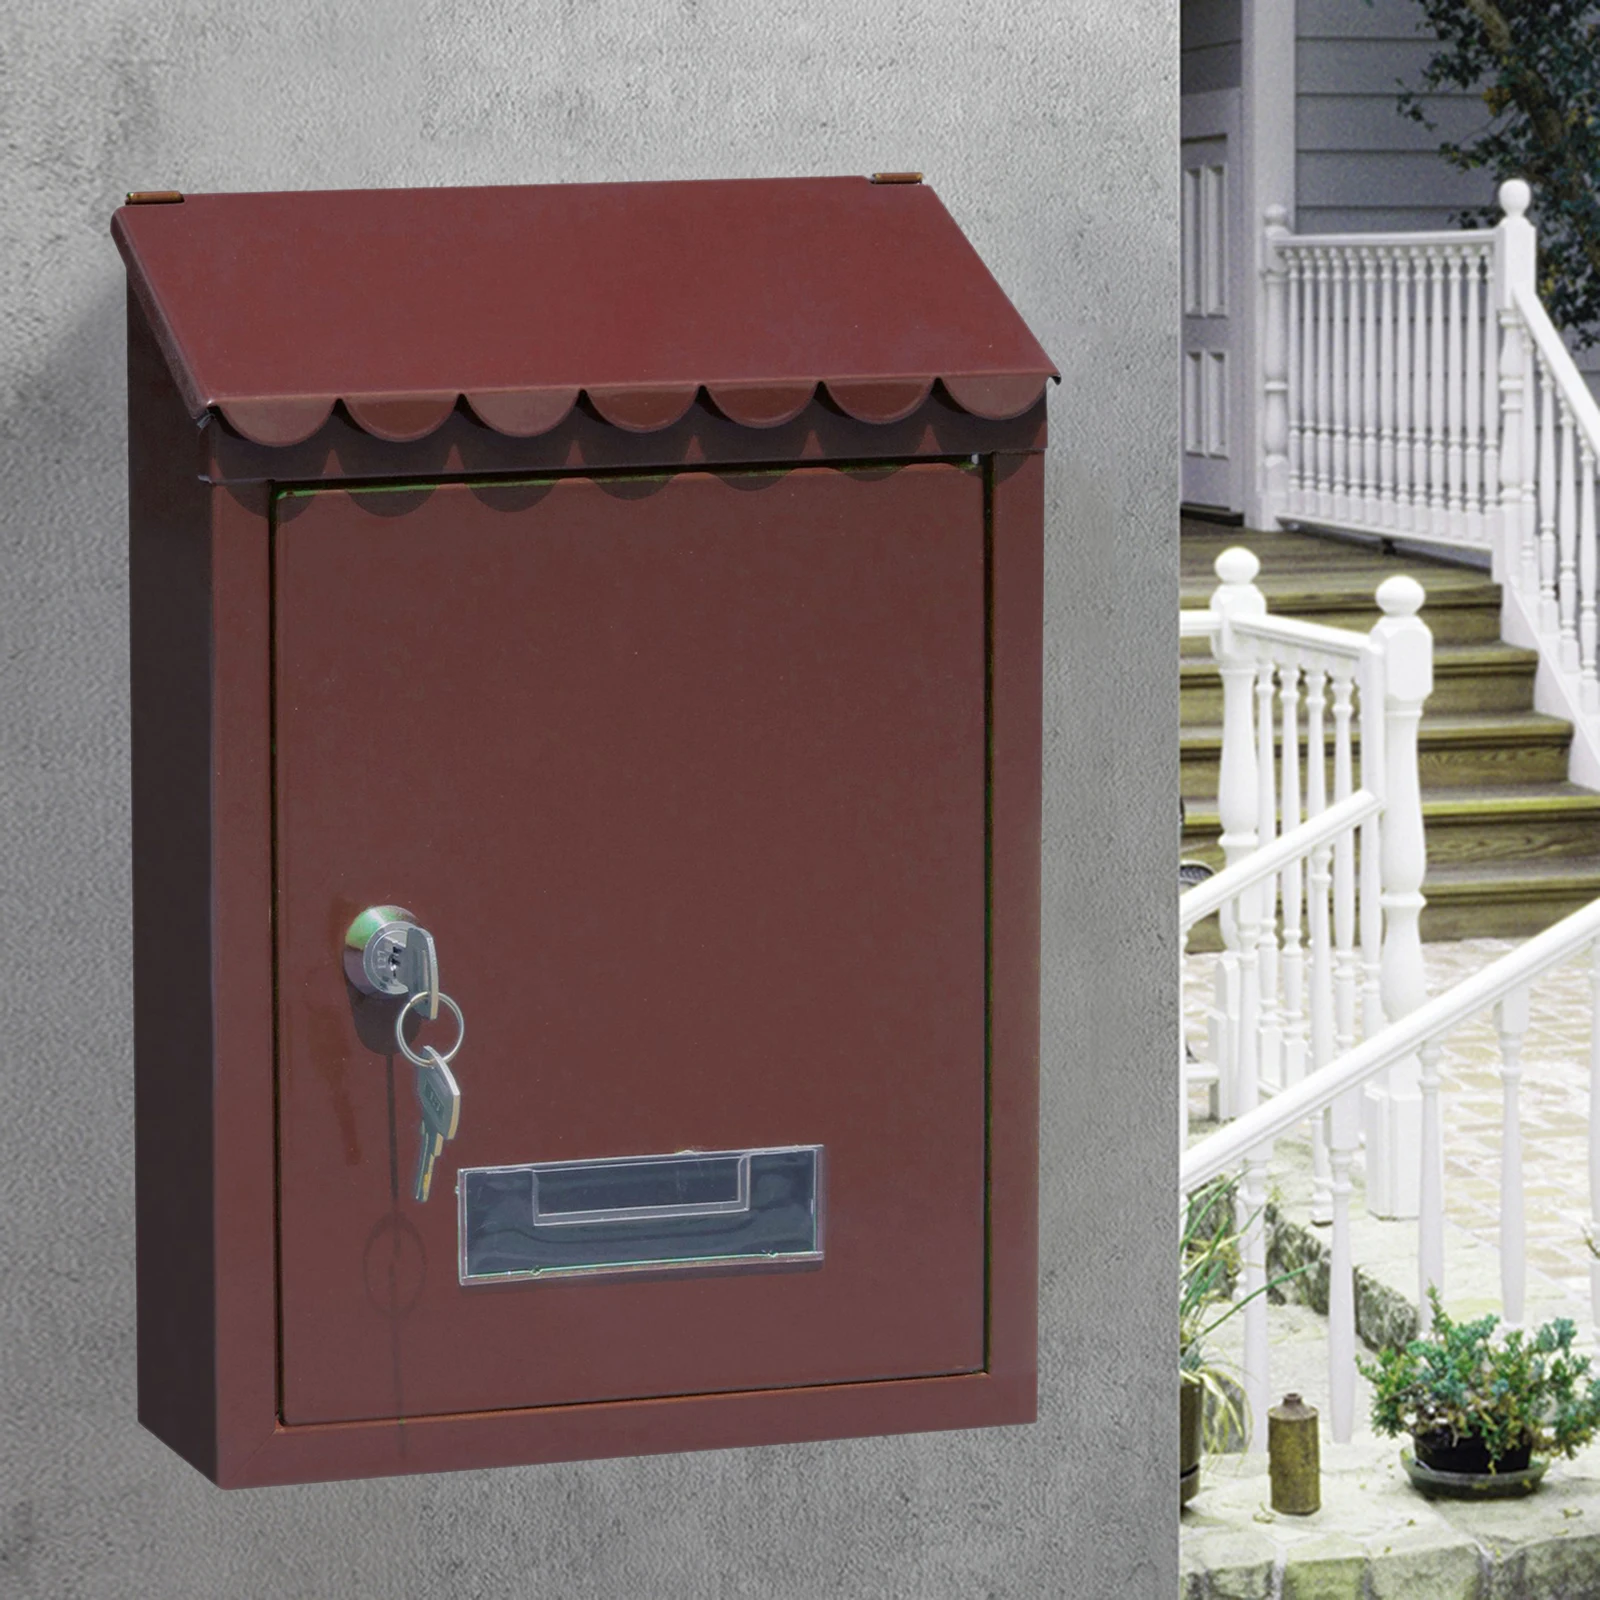 Rust-proof Mailbox Letterbox, Solid Rainproof Wall Mounted Secure Lockable Mail Box for Newspaper, Magazines, Letters Receiving